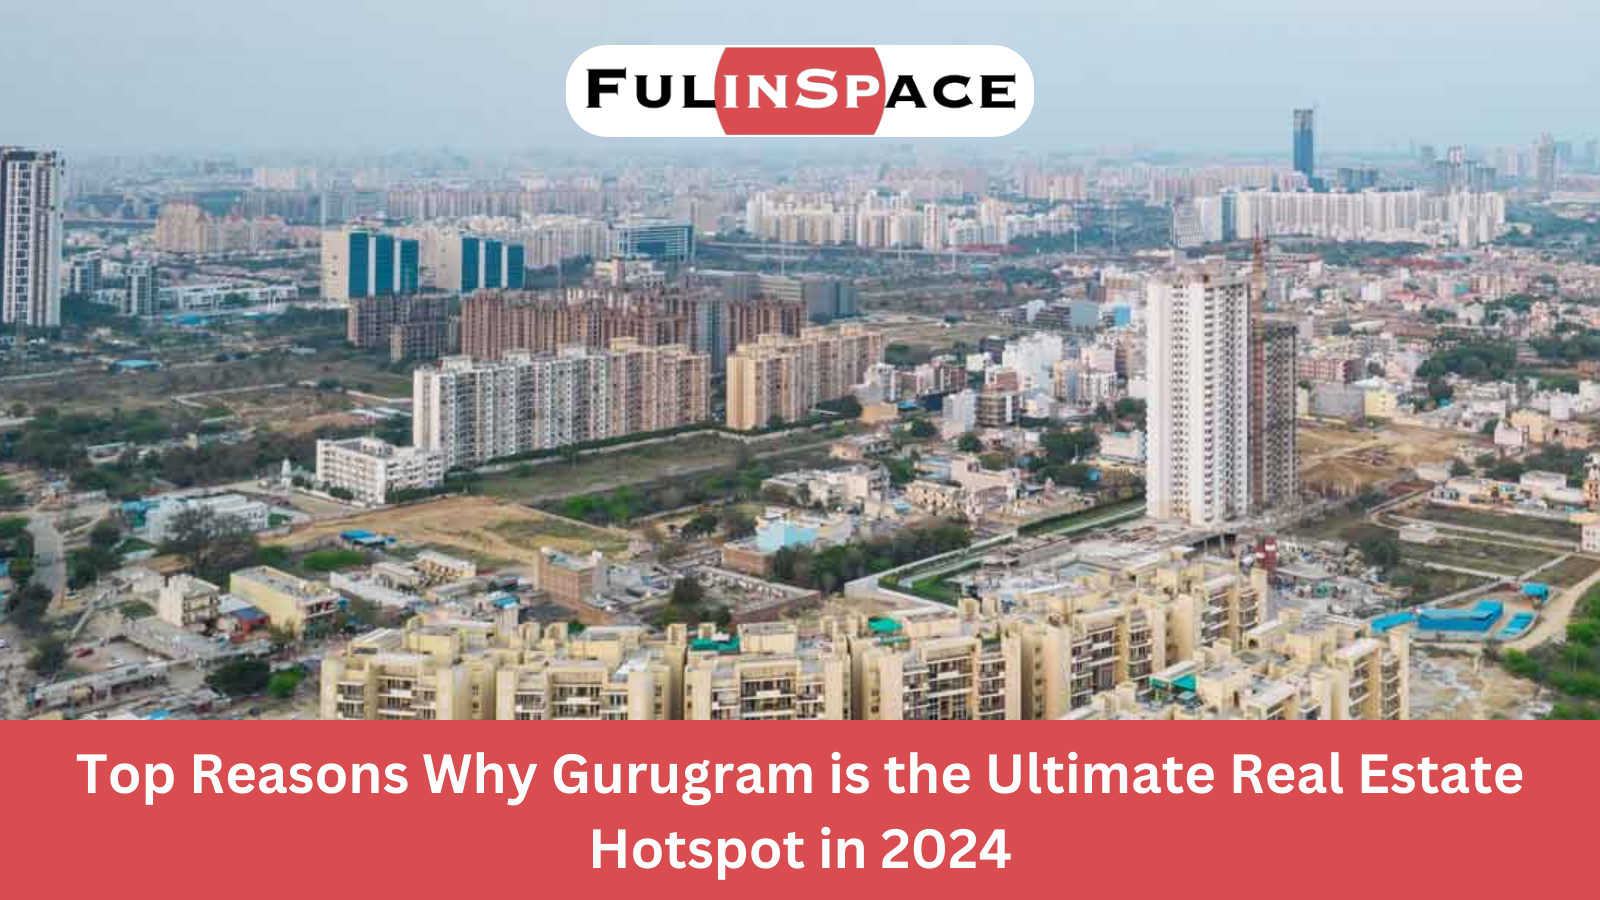 Top Reasons Why Gurugram is the Ultimate Real Estate Hotspot in 2024